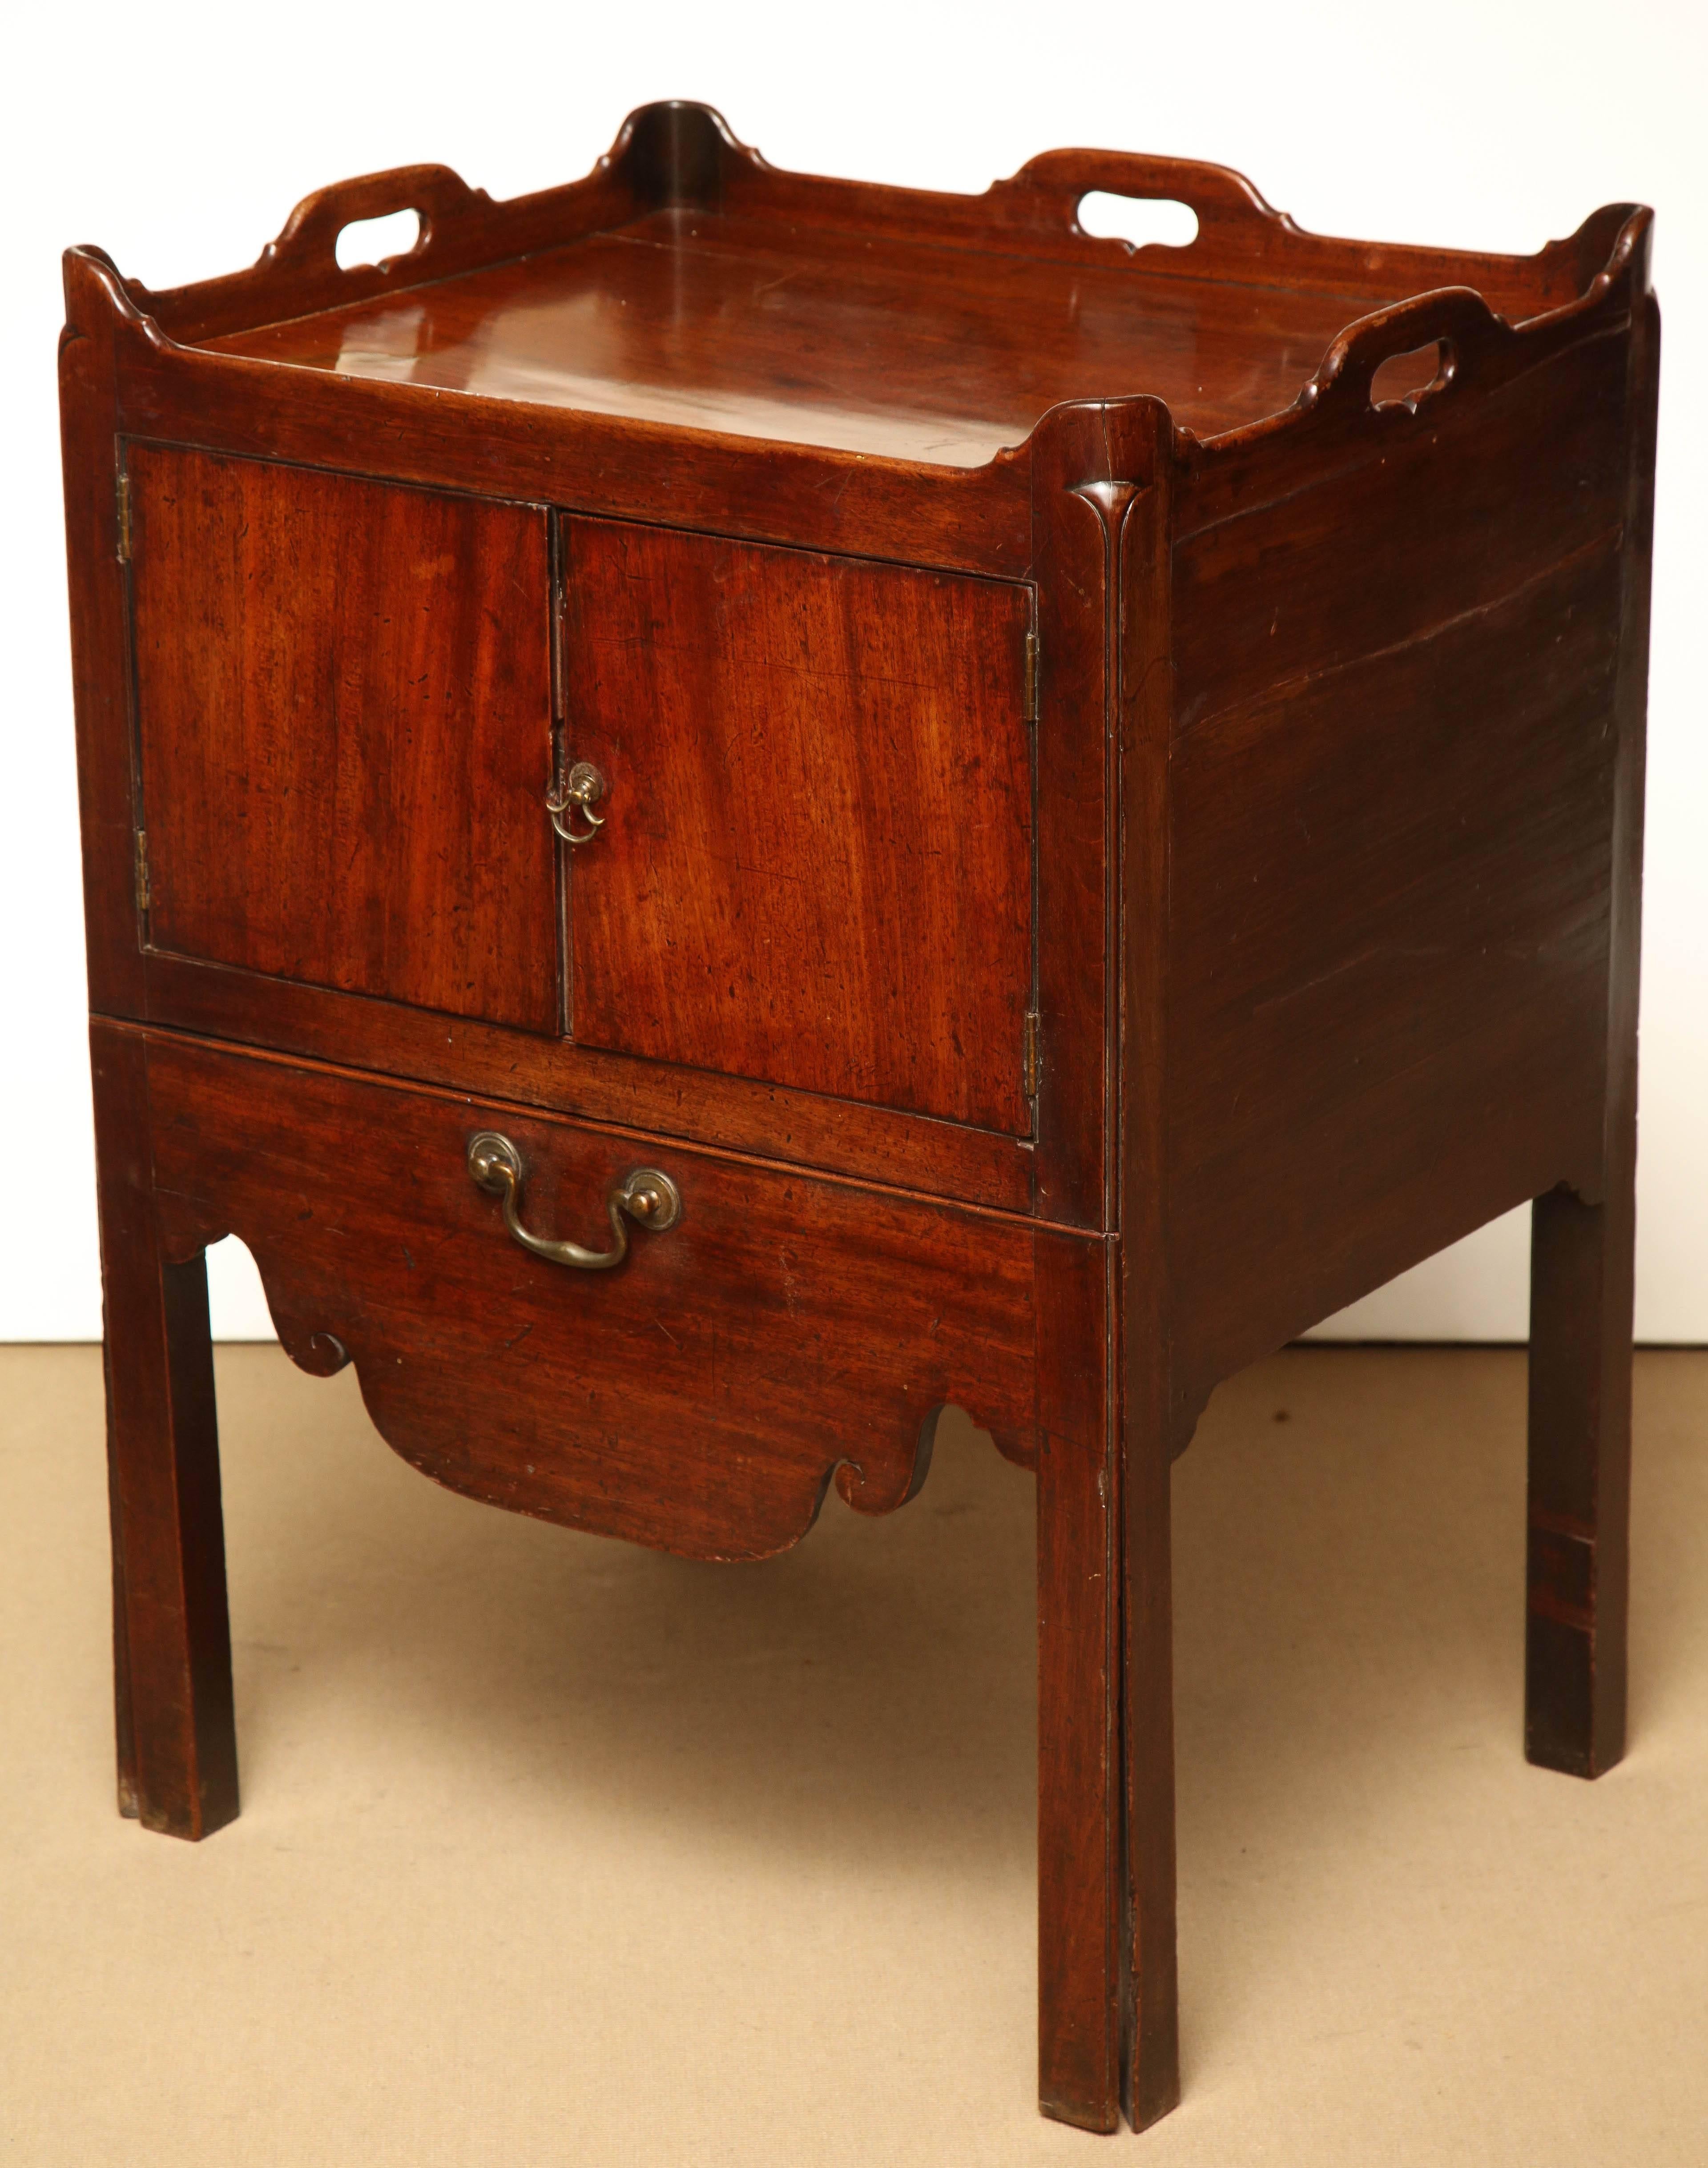 Early 19th century English bedside table in mahogany.